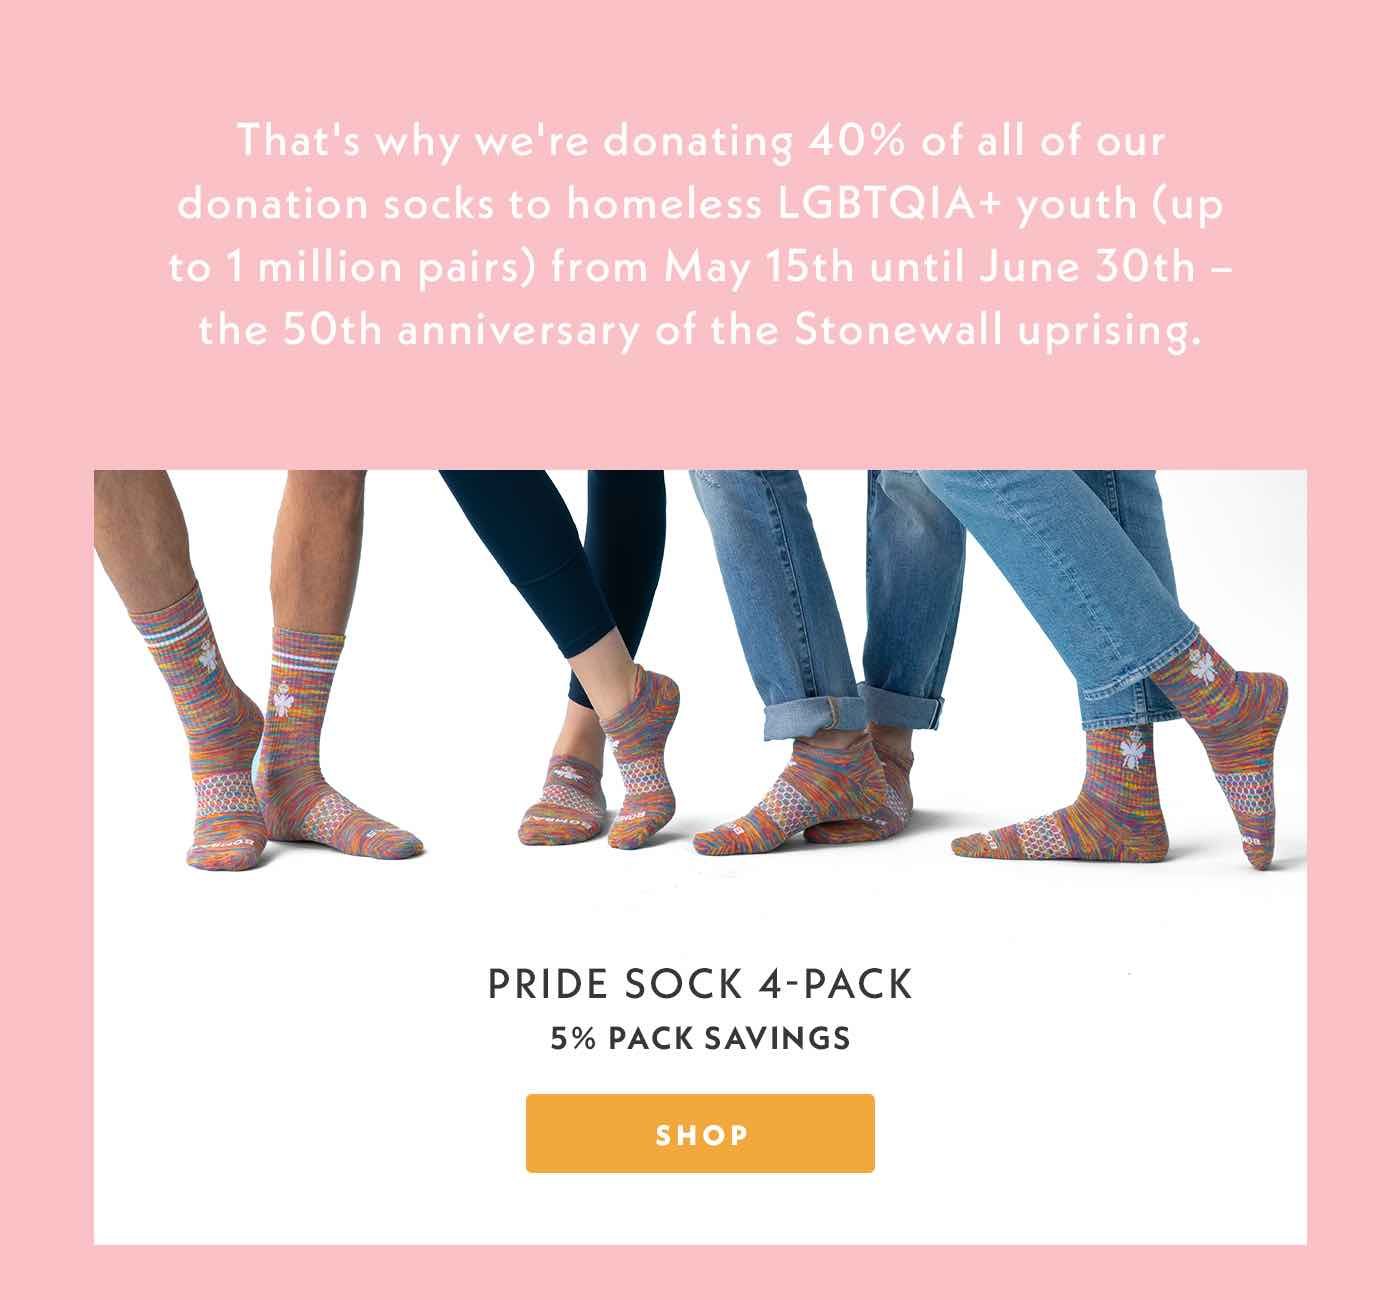 Shop Pride Sock 4-Pack. We're donating 40% of all of our donation socks to homeless LGBTQIA+ youth (up to 1 million pairs) from May 15th until June 30th - the 50th anniversary of the Stonewall uprising.